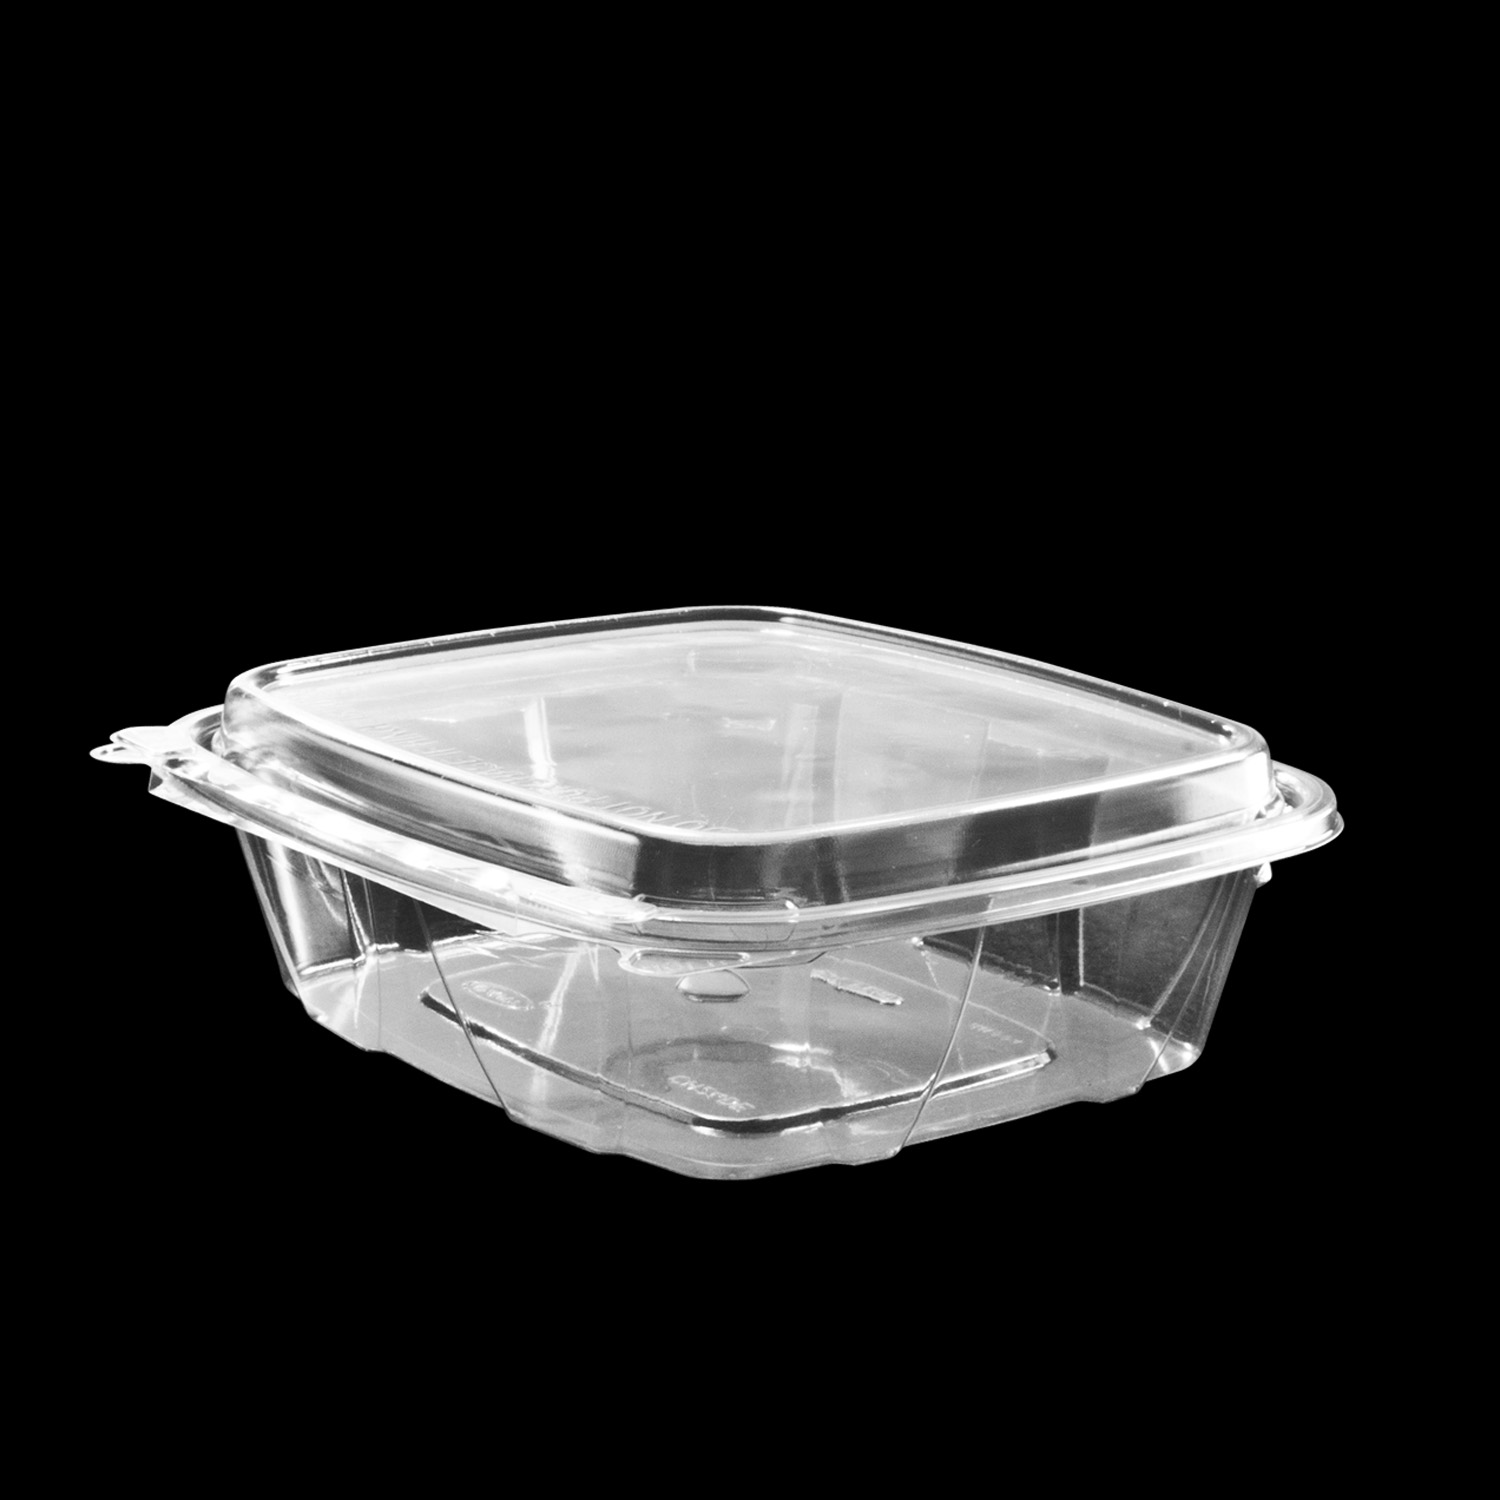 24OZ SAFESEAL CONTAINER DOME
LID 
200